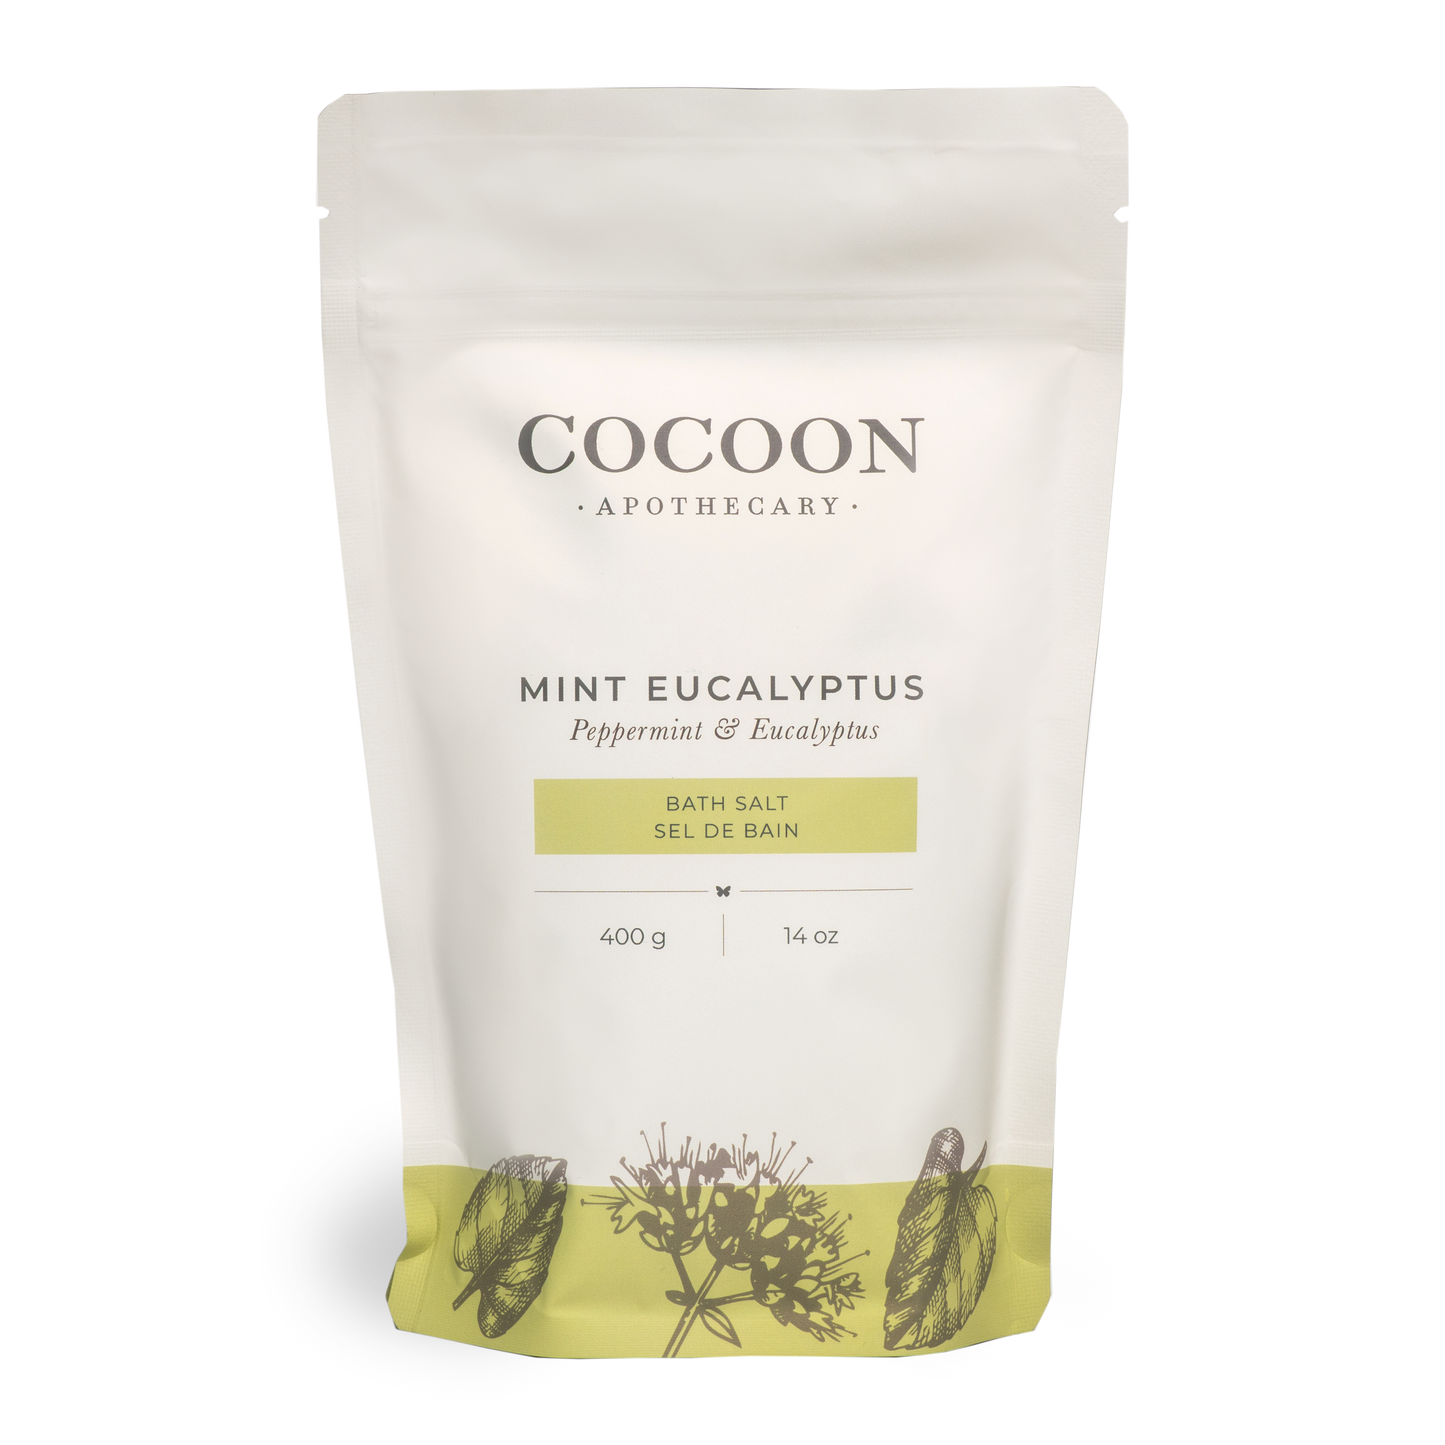 Mineral rich Dead Sea salts, Epsom salts and pure essential oils creates a spa-like bathing experience. Mint Eucalyptus has a penetrating aroma that smells soothing and medicinal.